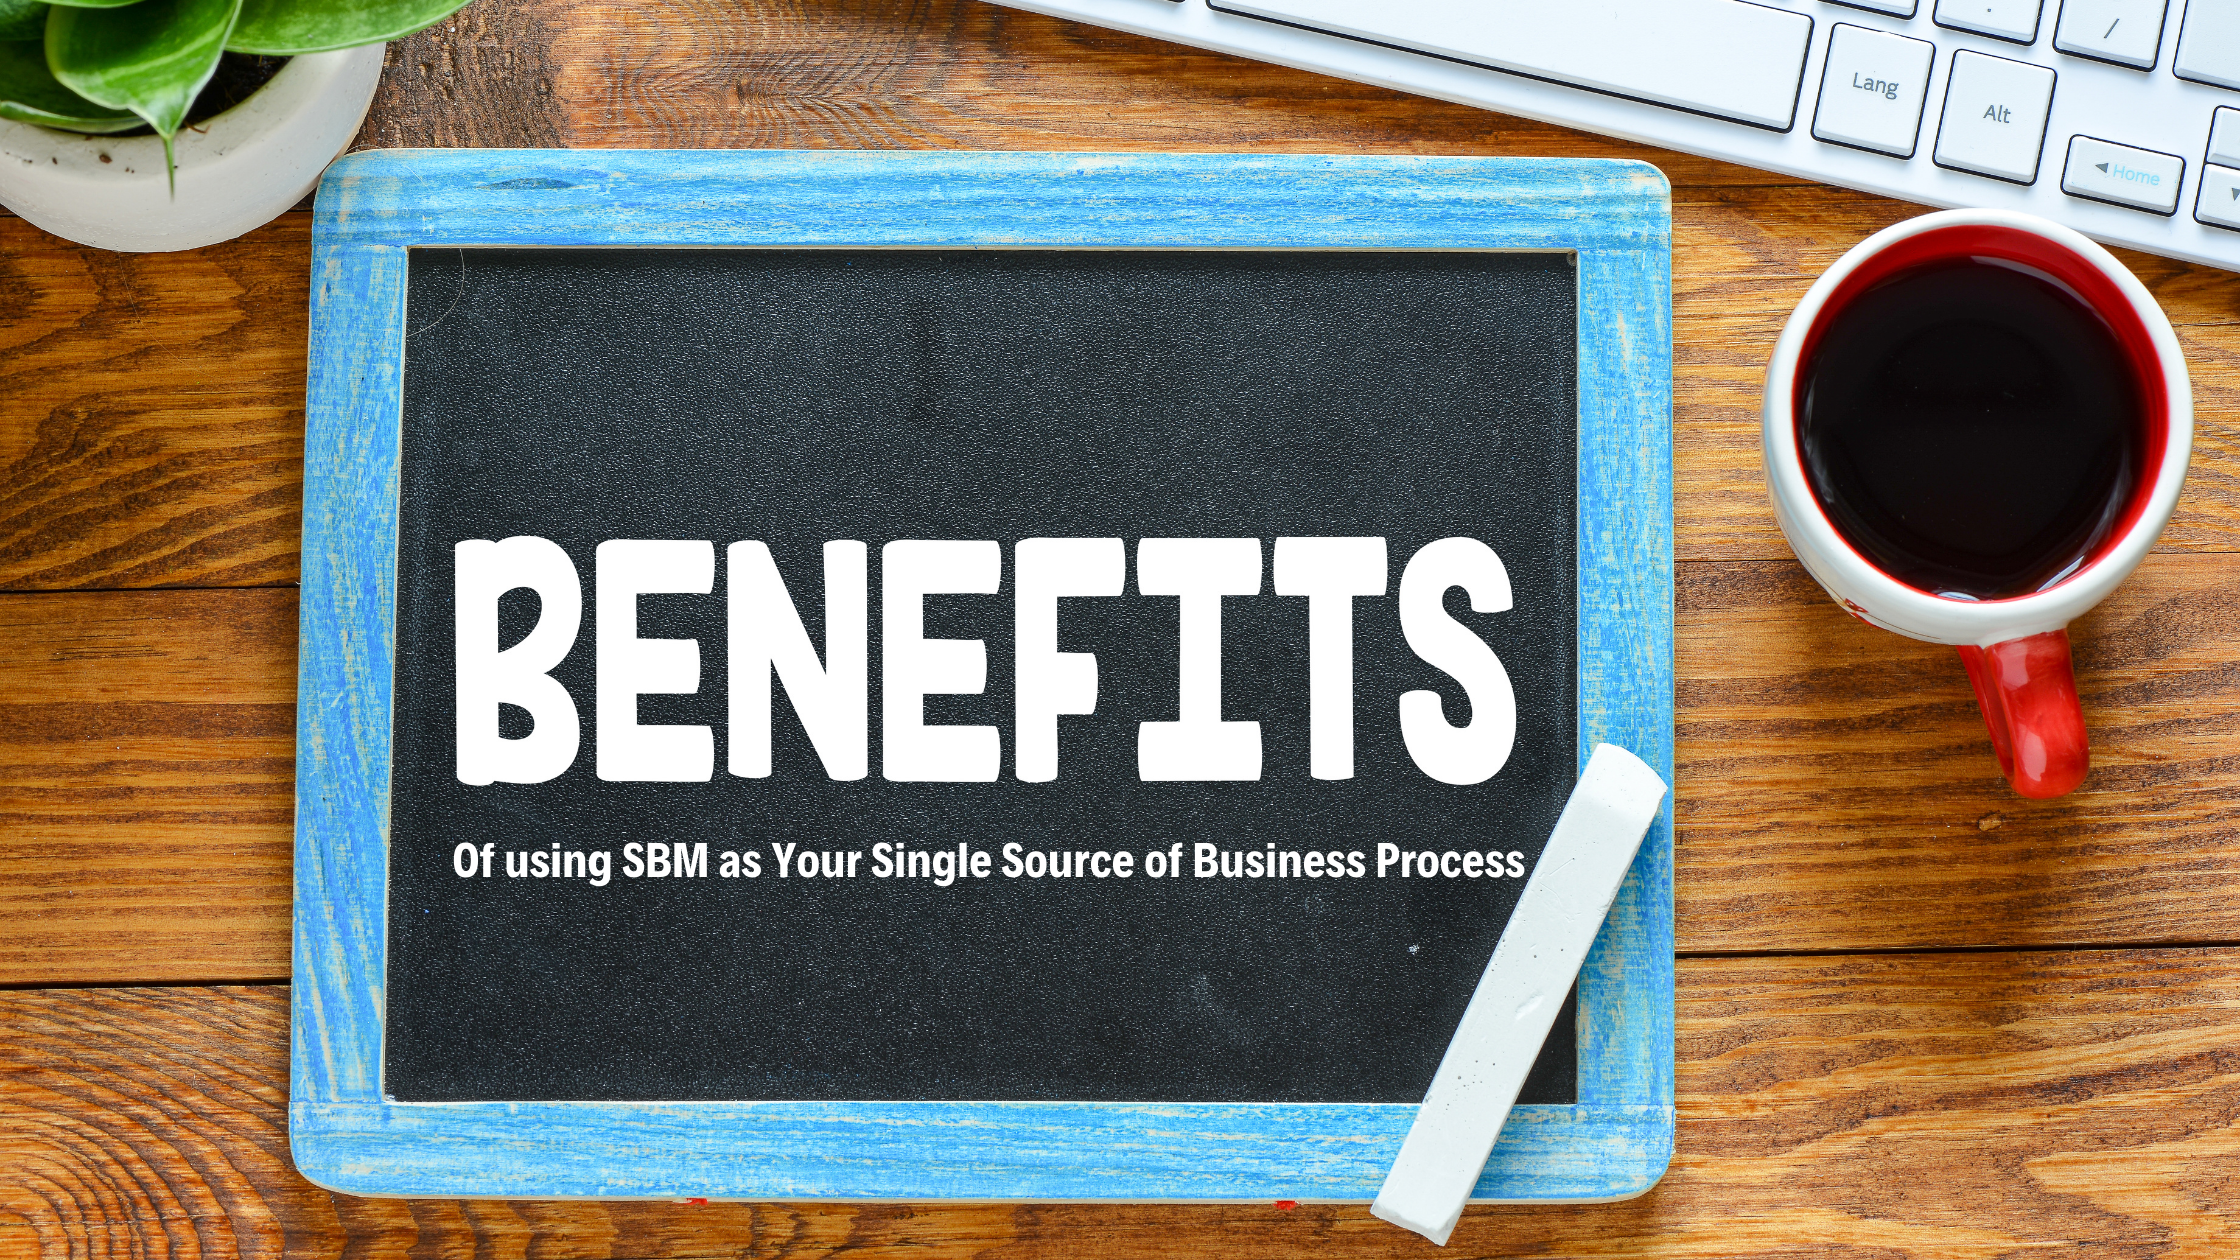 Benefits of using Solutions Business Manager as your single source of business process